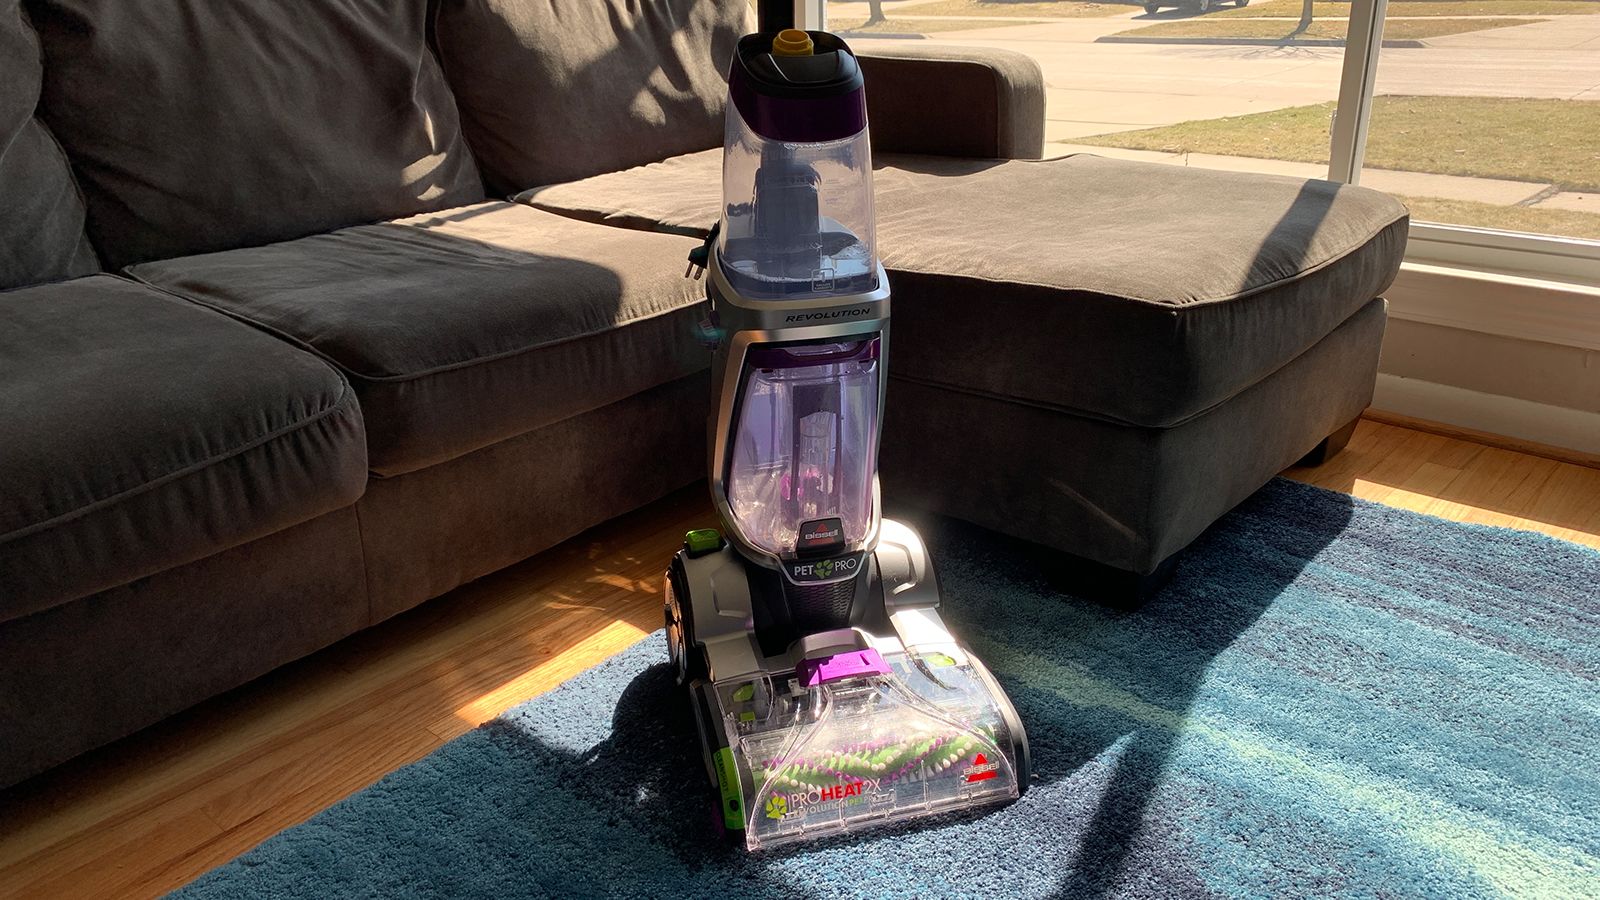 Washing vacuum cleaner: the ideal carpet cleaner